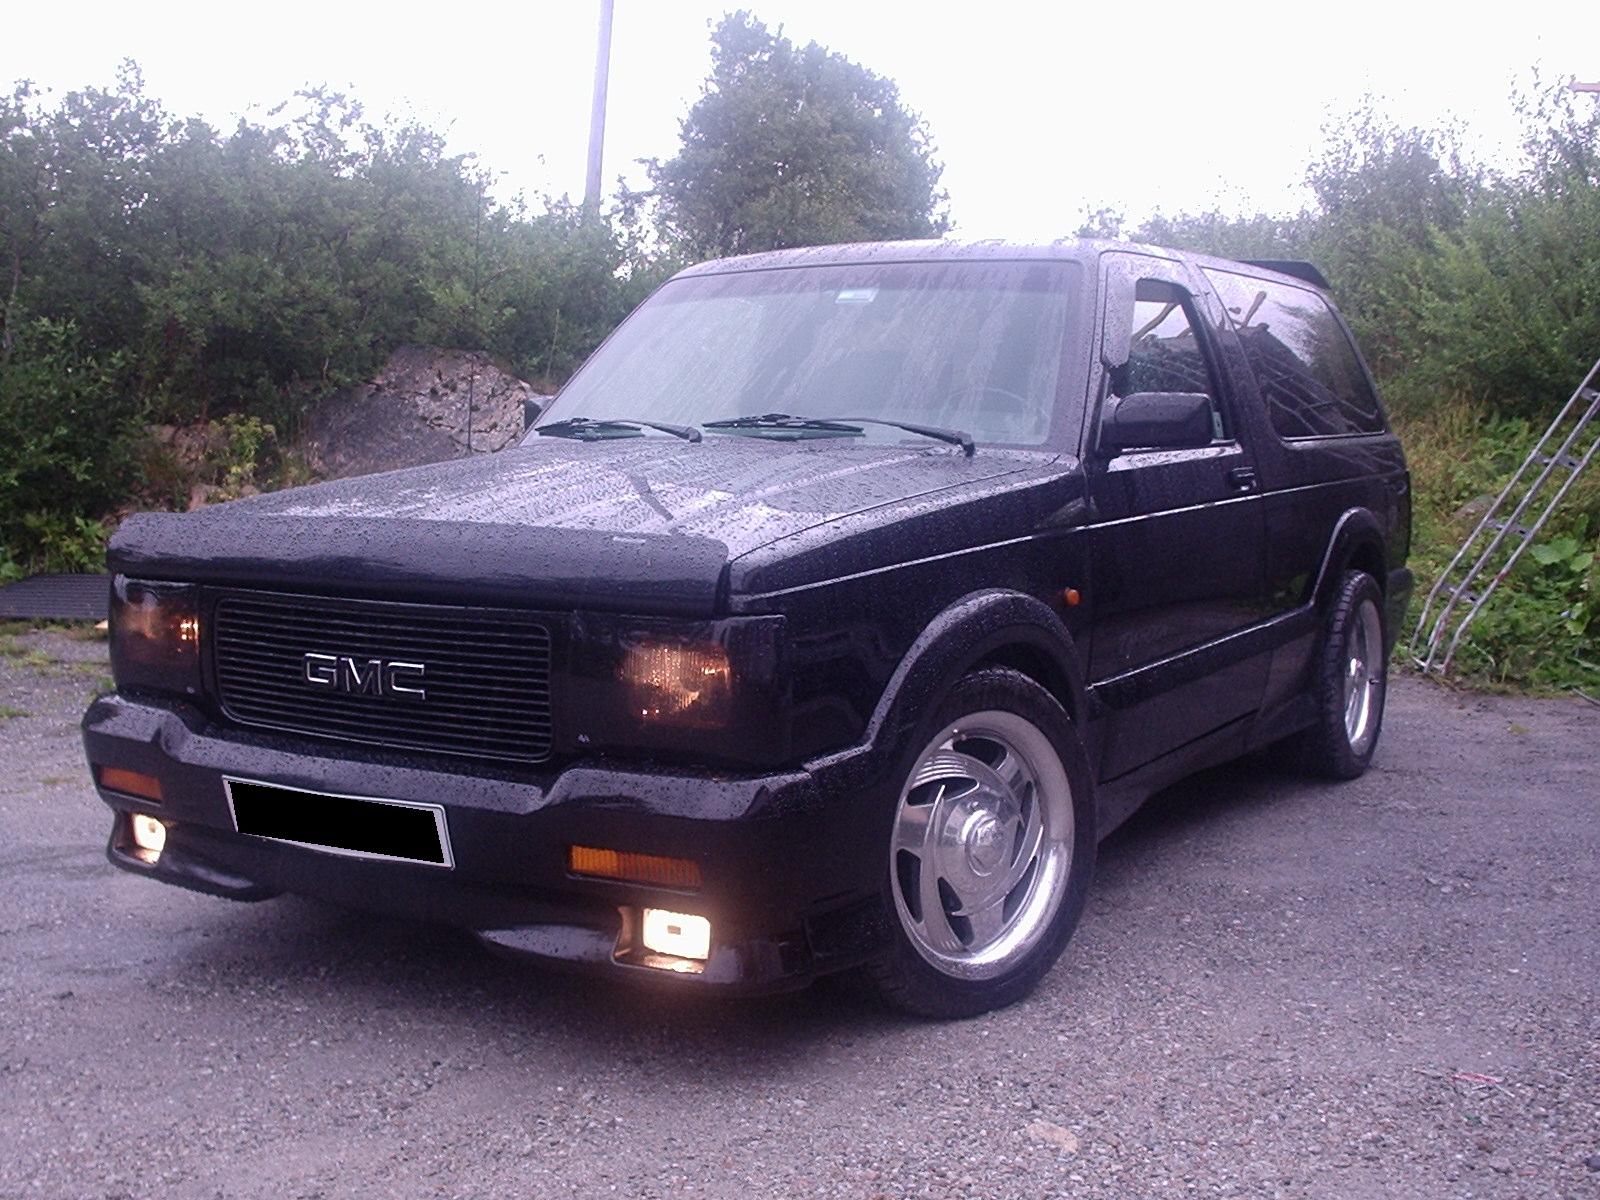 Ratings and reviews on a 1993 gmc typhoon #2